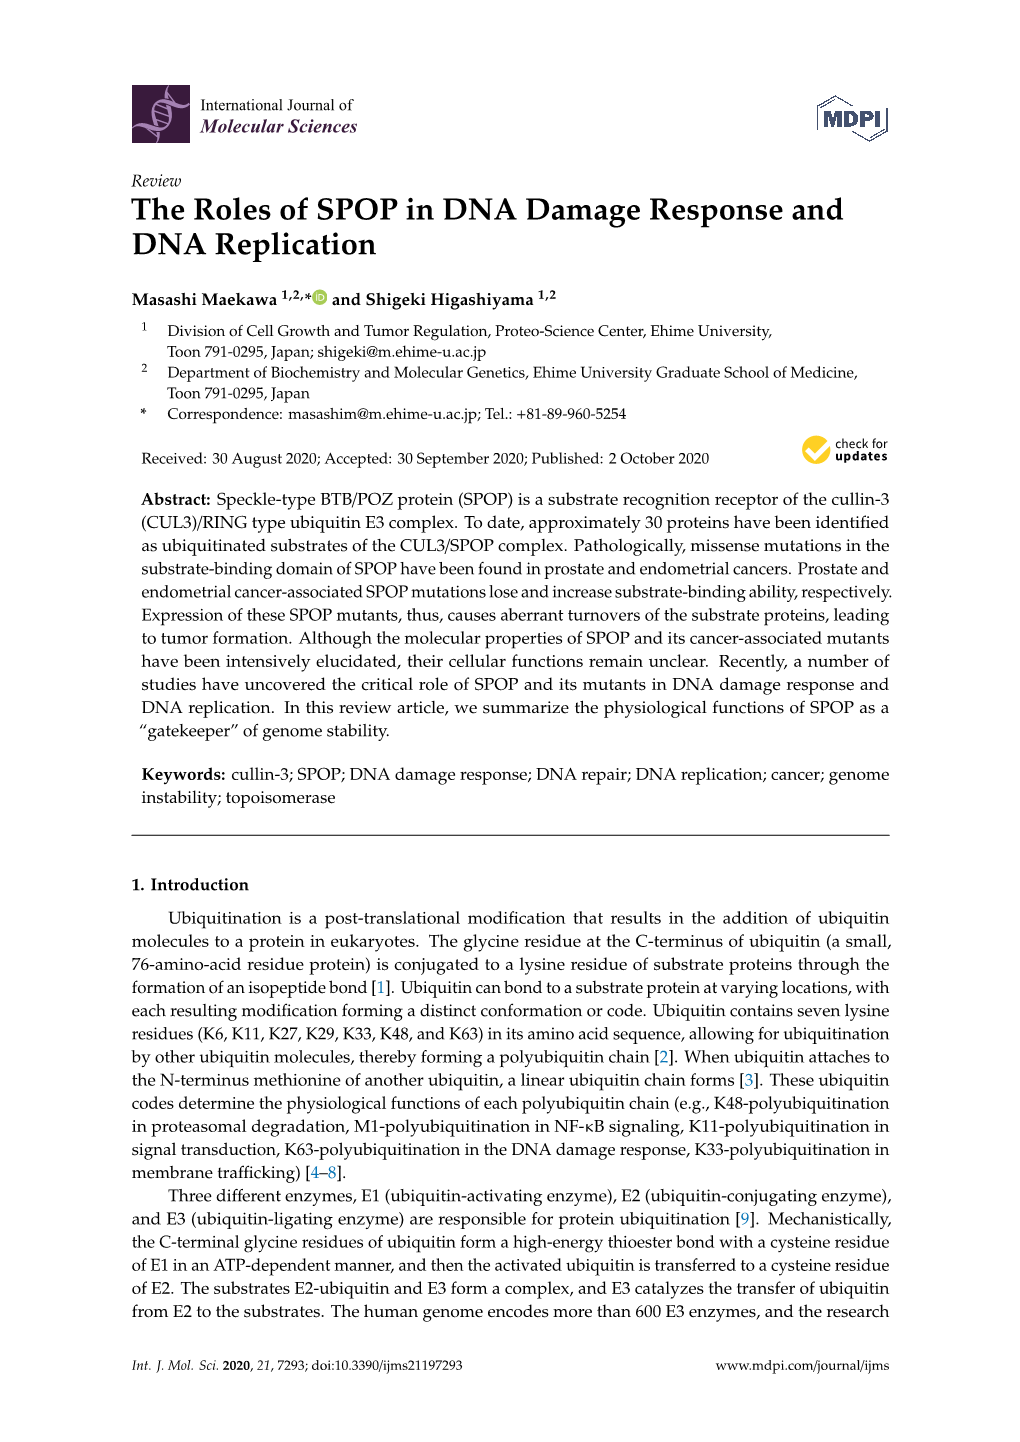 The Roles of SPOP in DNA Damage Response and DNA Replication